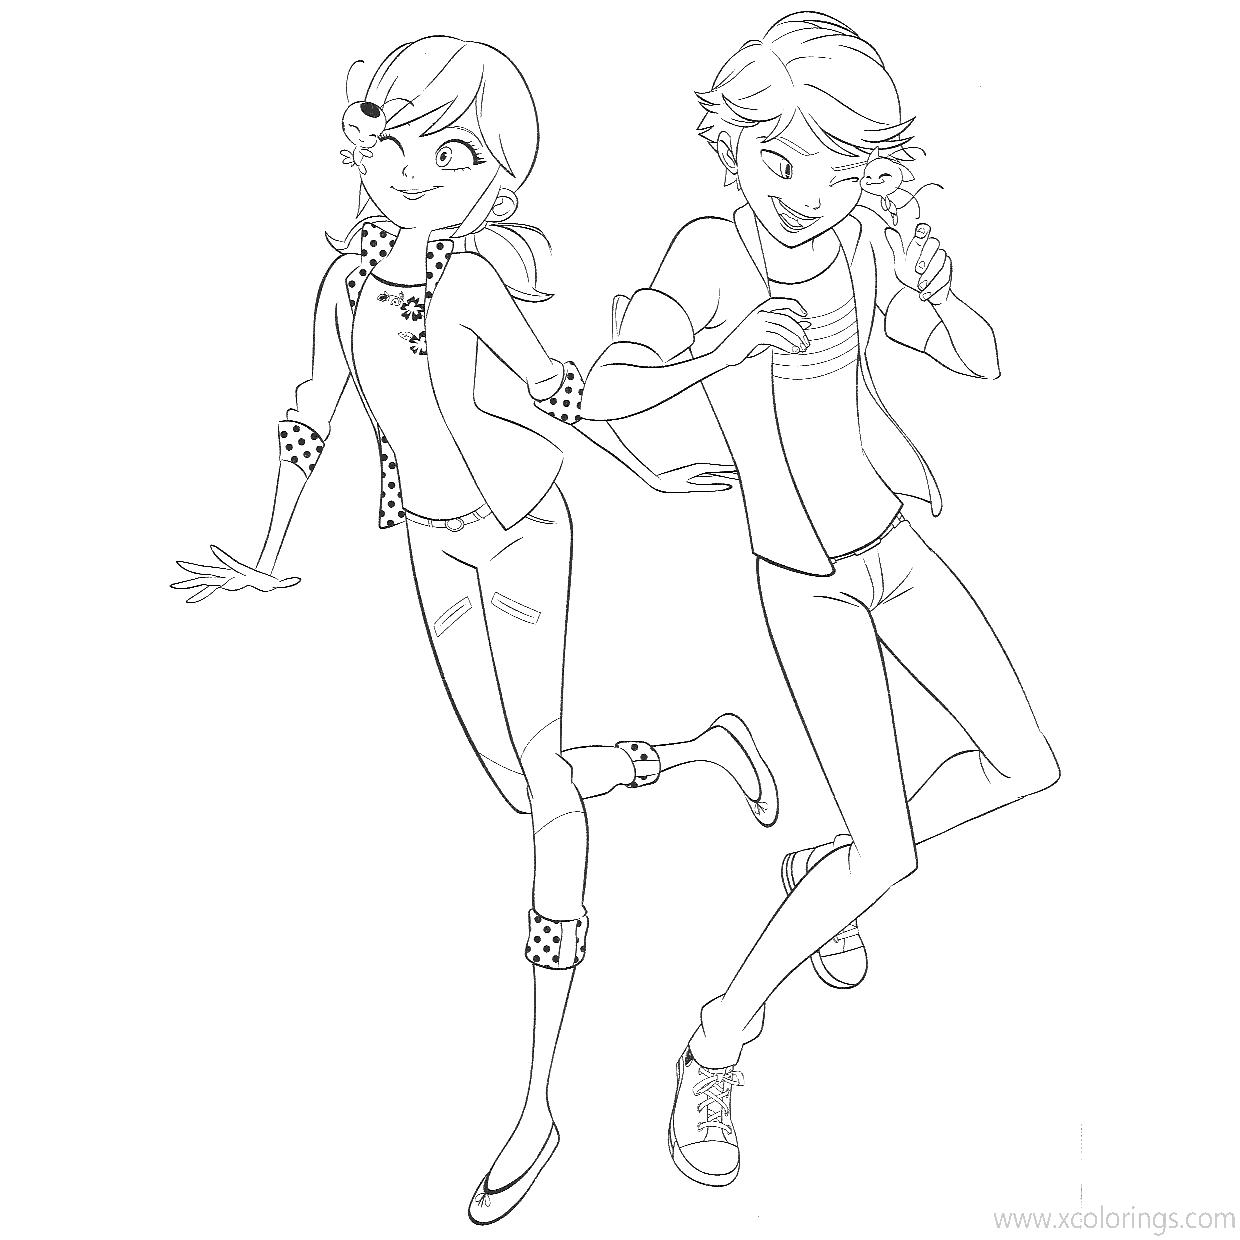 Free Miraculous Ladybug Coloring Pages Cute Marinette and Adrien printable